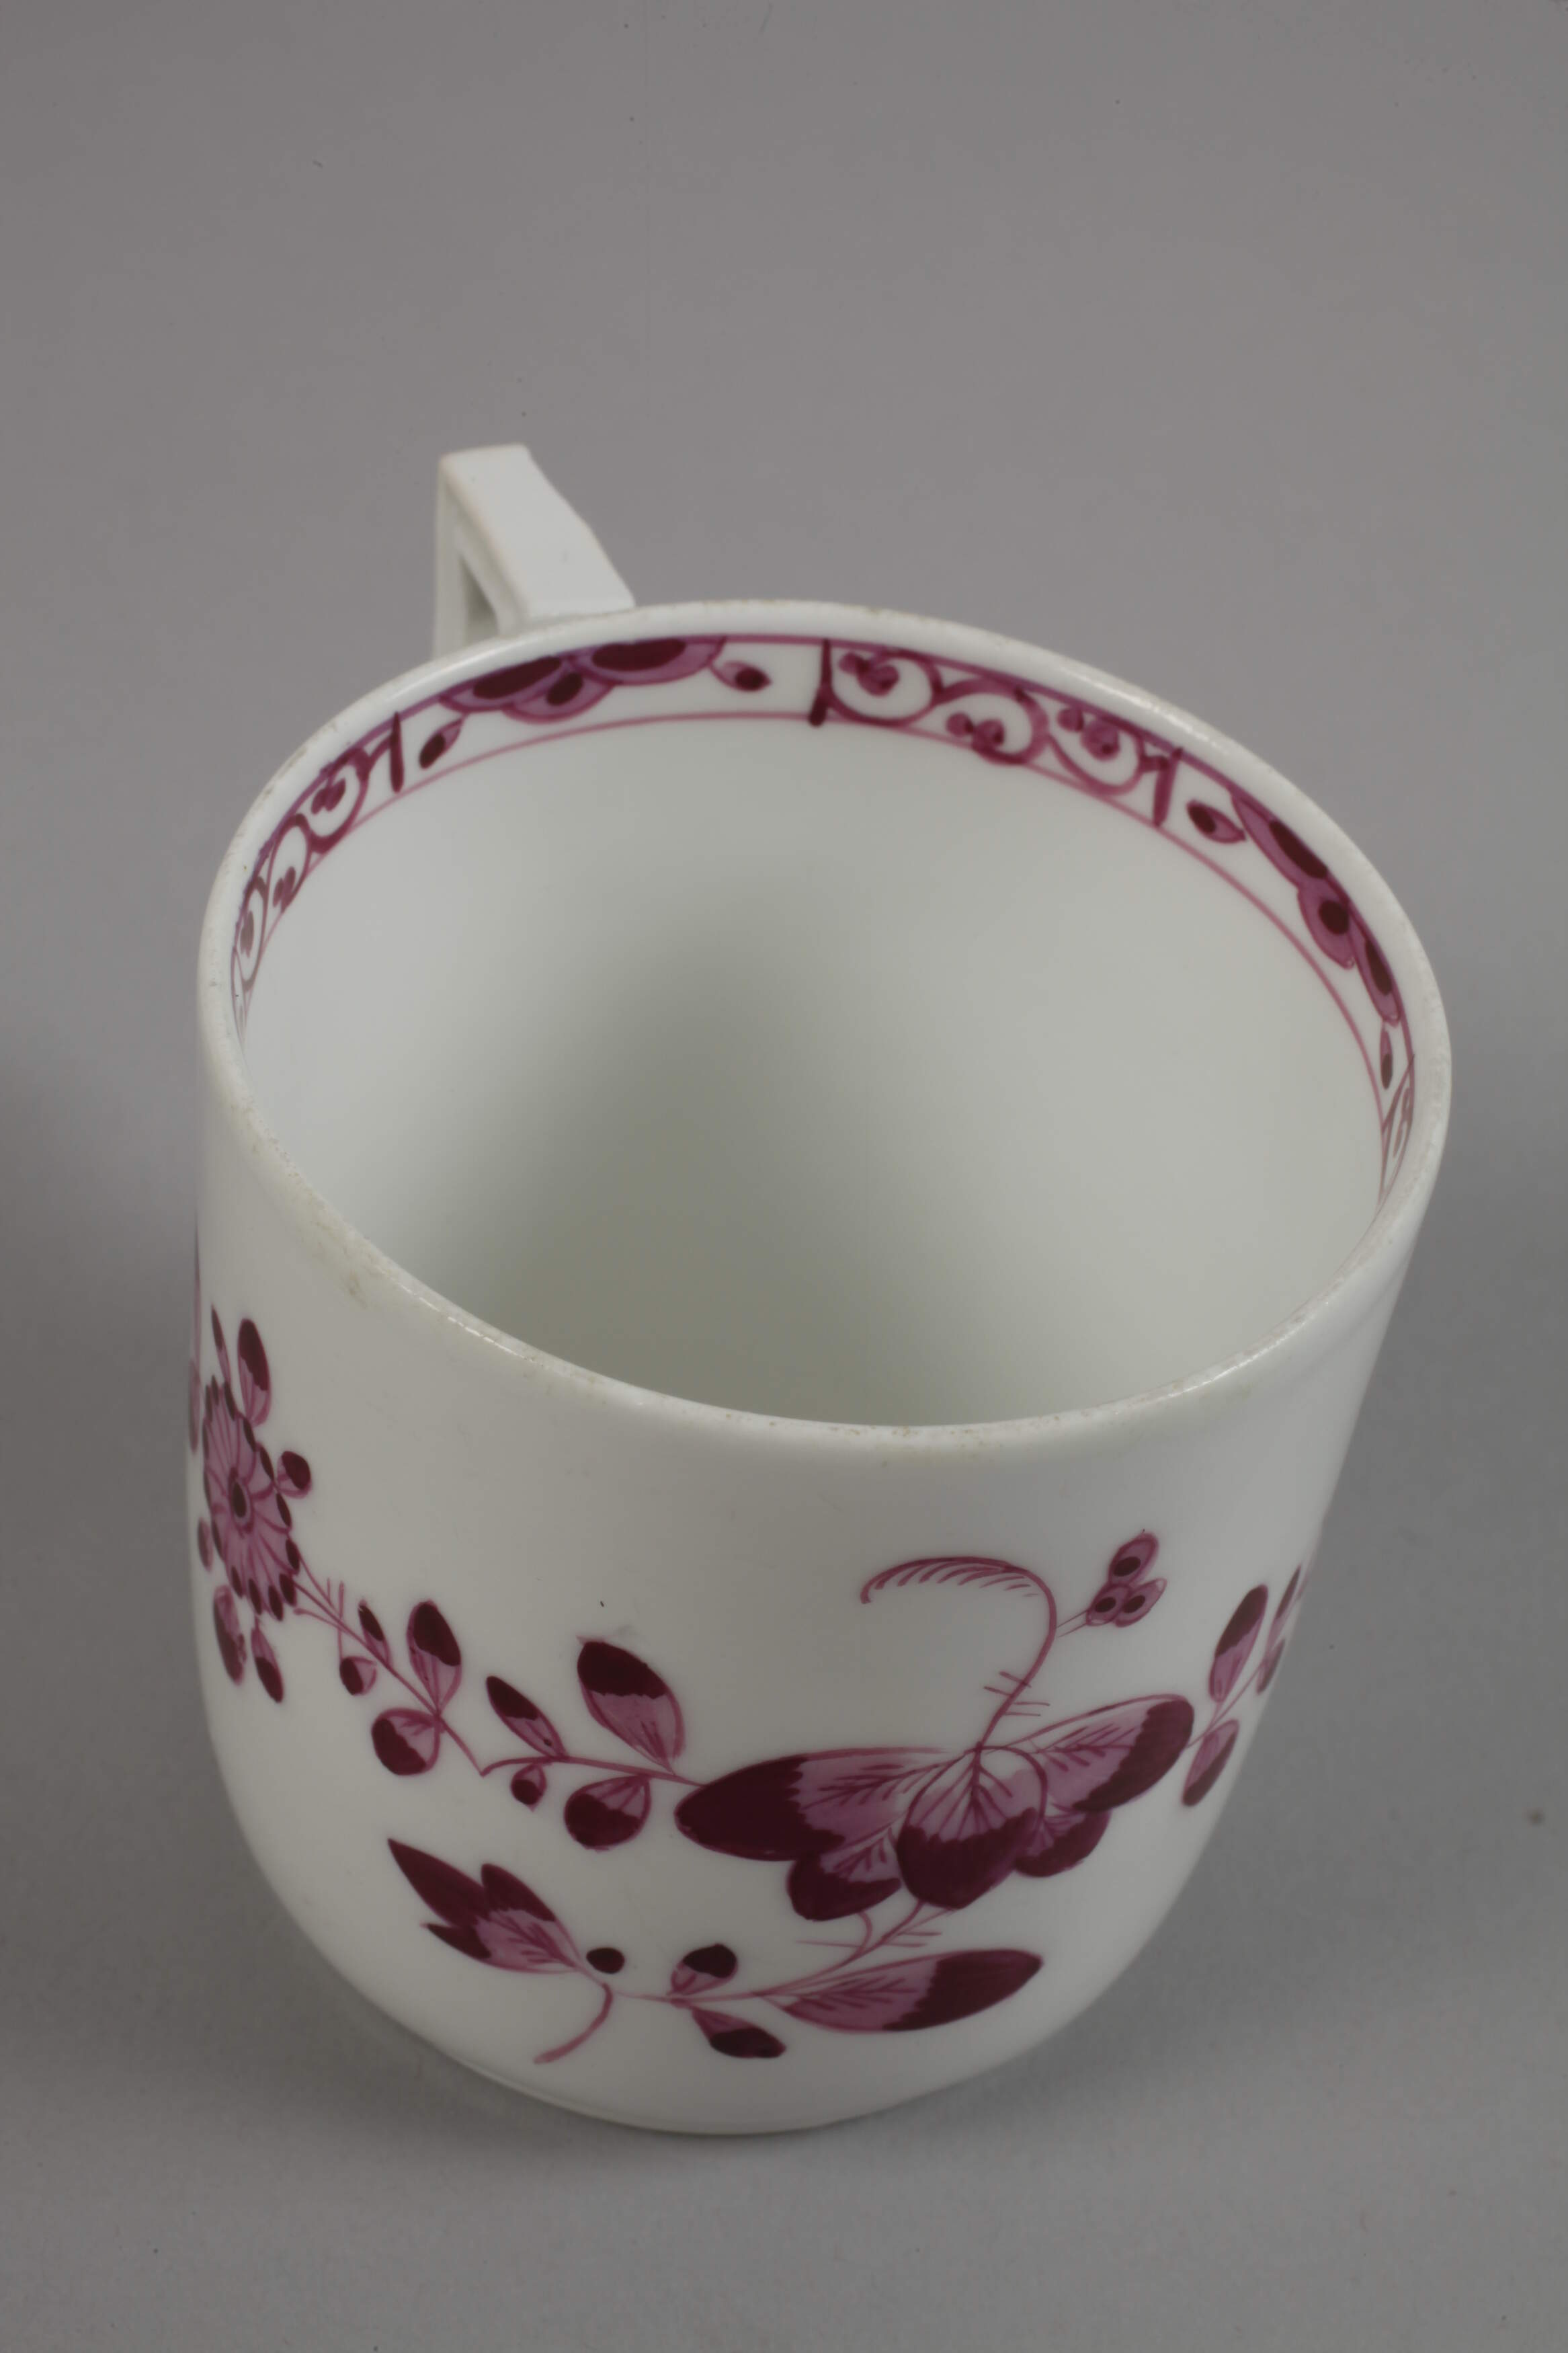 Meissen cup and saucer Marcolini period - Image 4 of 4